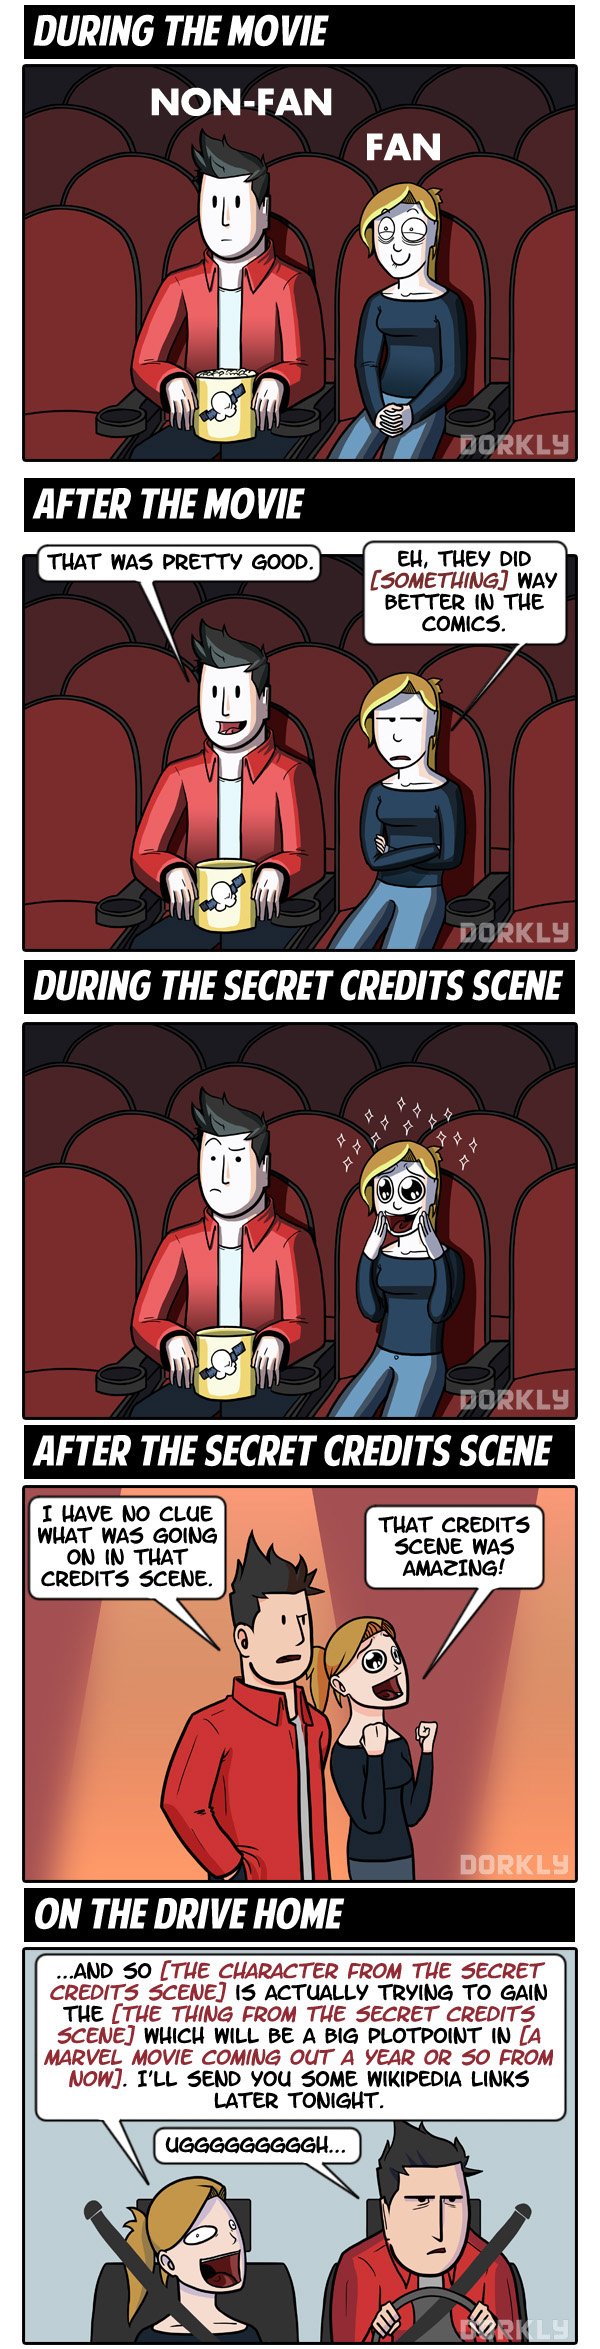 Seeing Marvel Movies with Comic Fans vs. Movie Fans